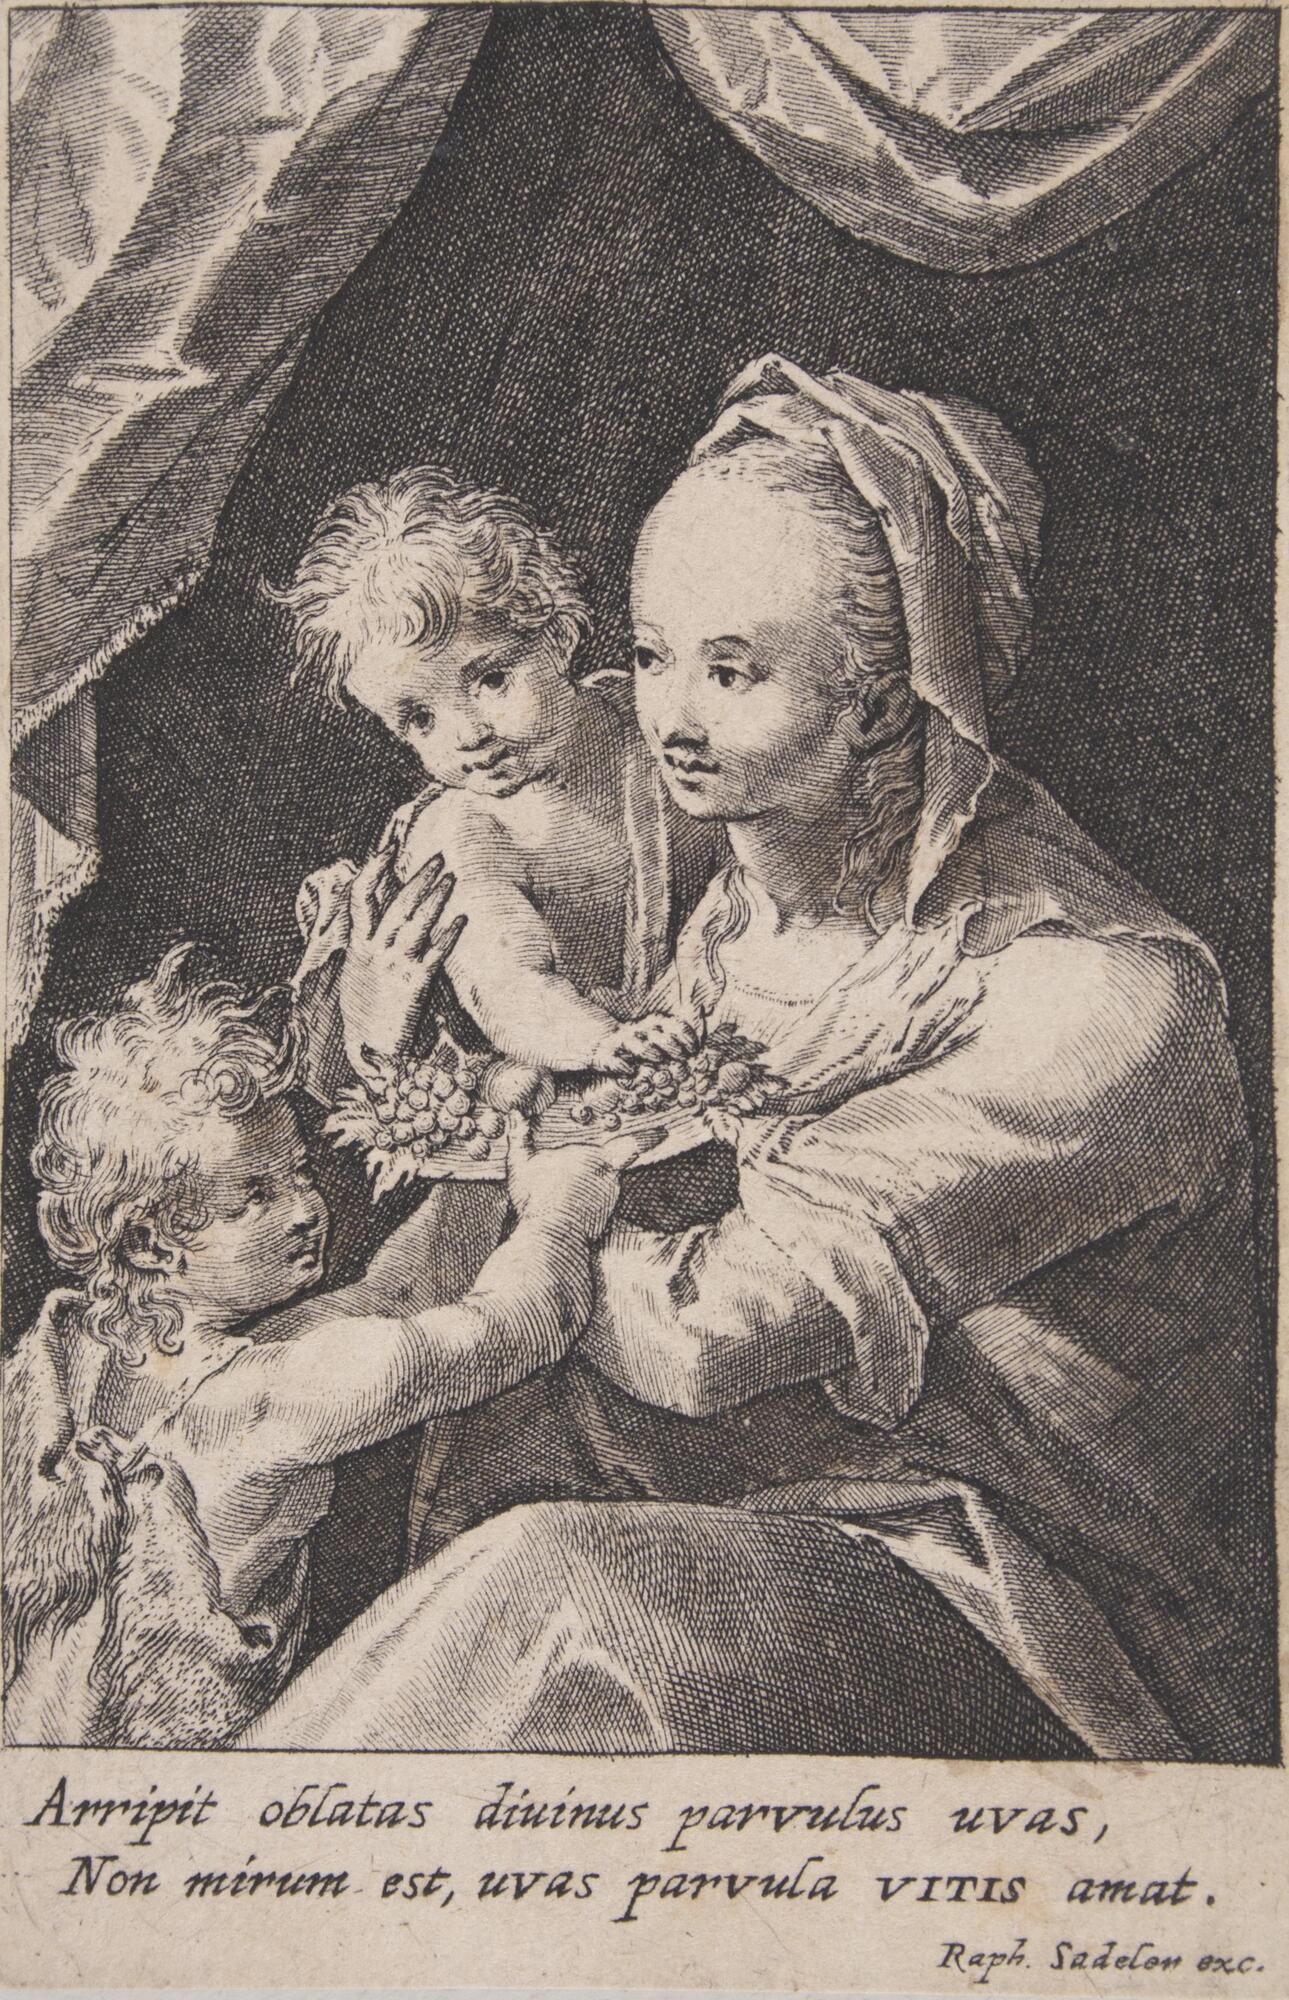 A seated woman holds a baby, who reaches out toward a tray of grapes offered by a standing toddler.  The figures are situated under a curtain of drapery.